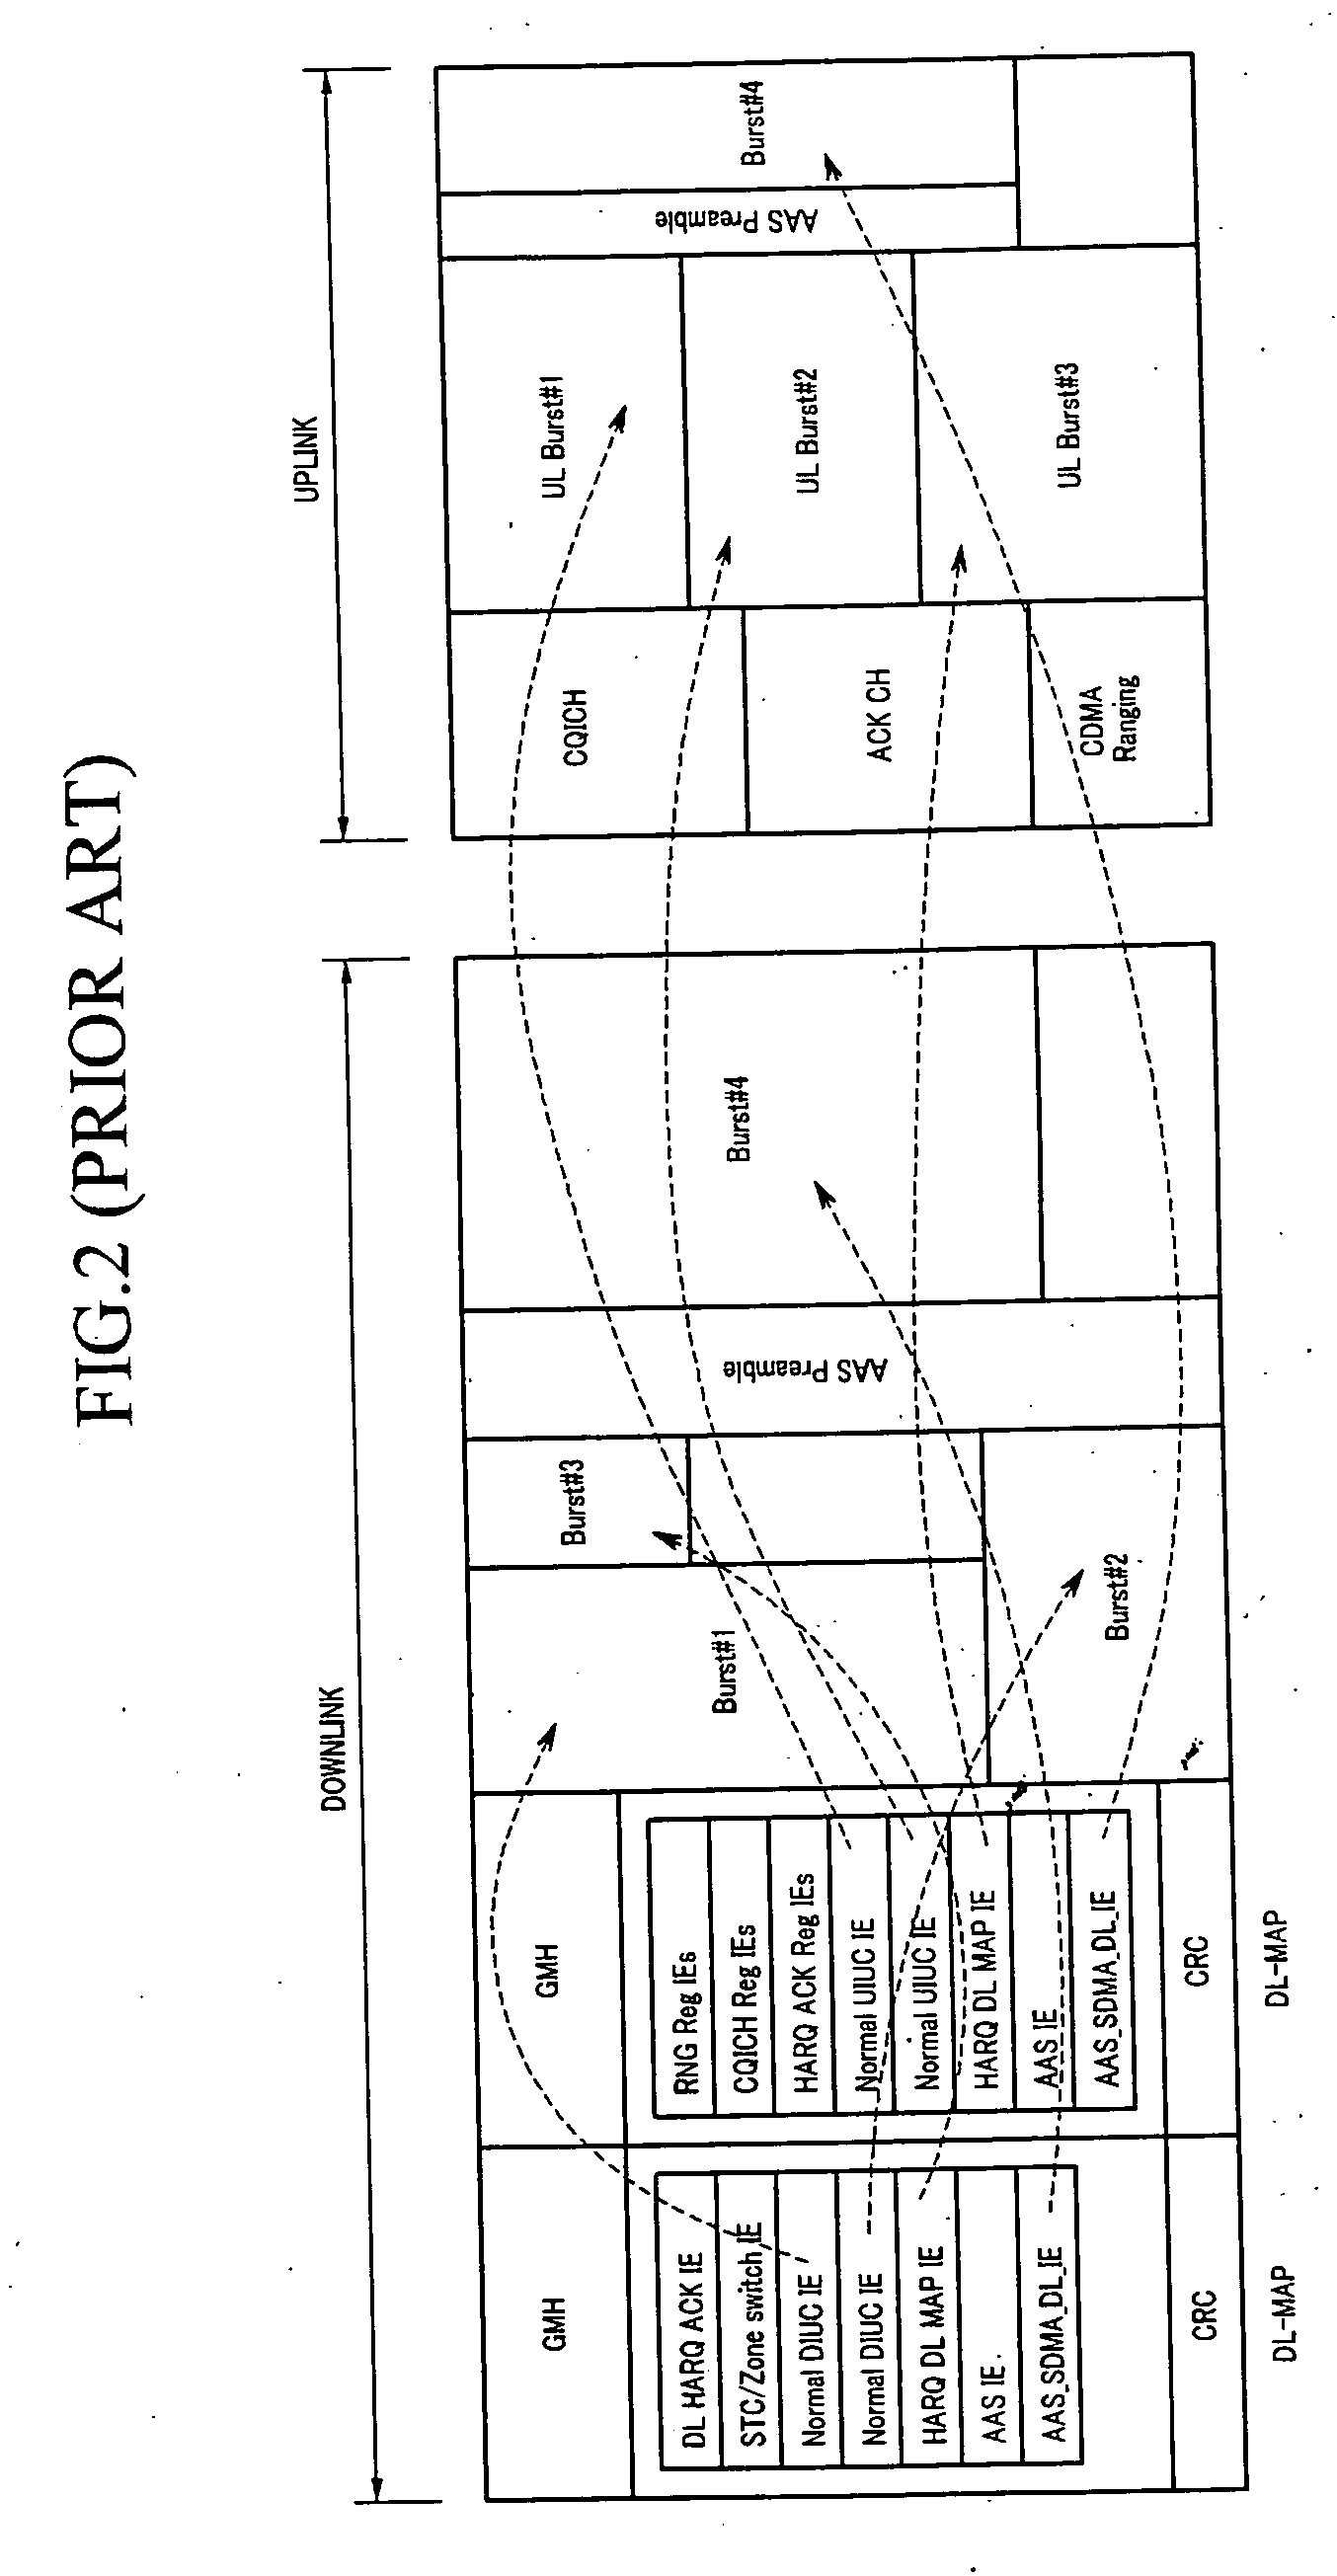 Apparatus and method for downlink packet scheduling in base station of a portable internet system